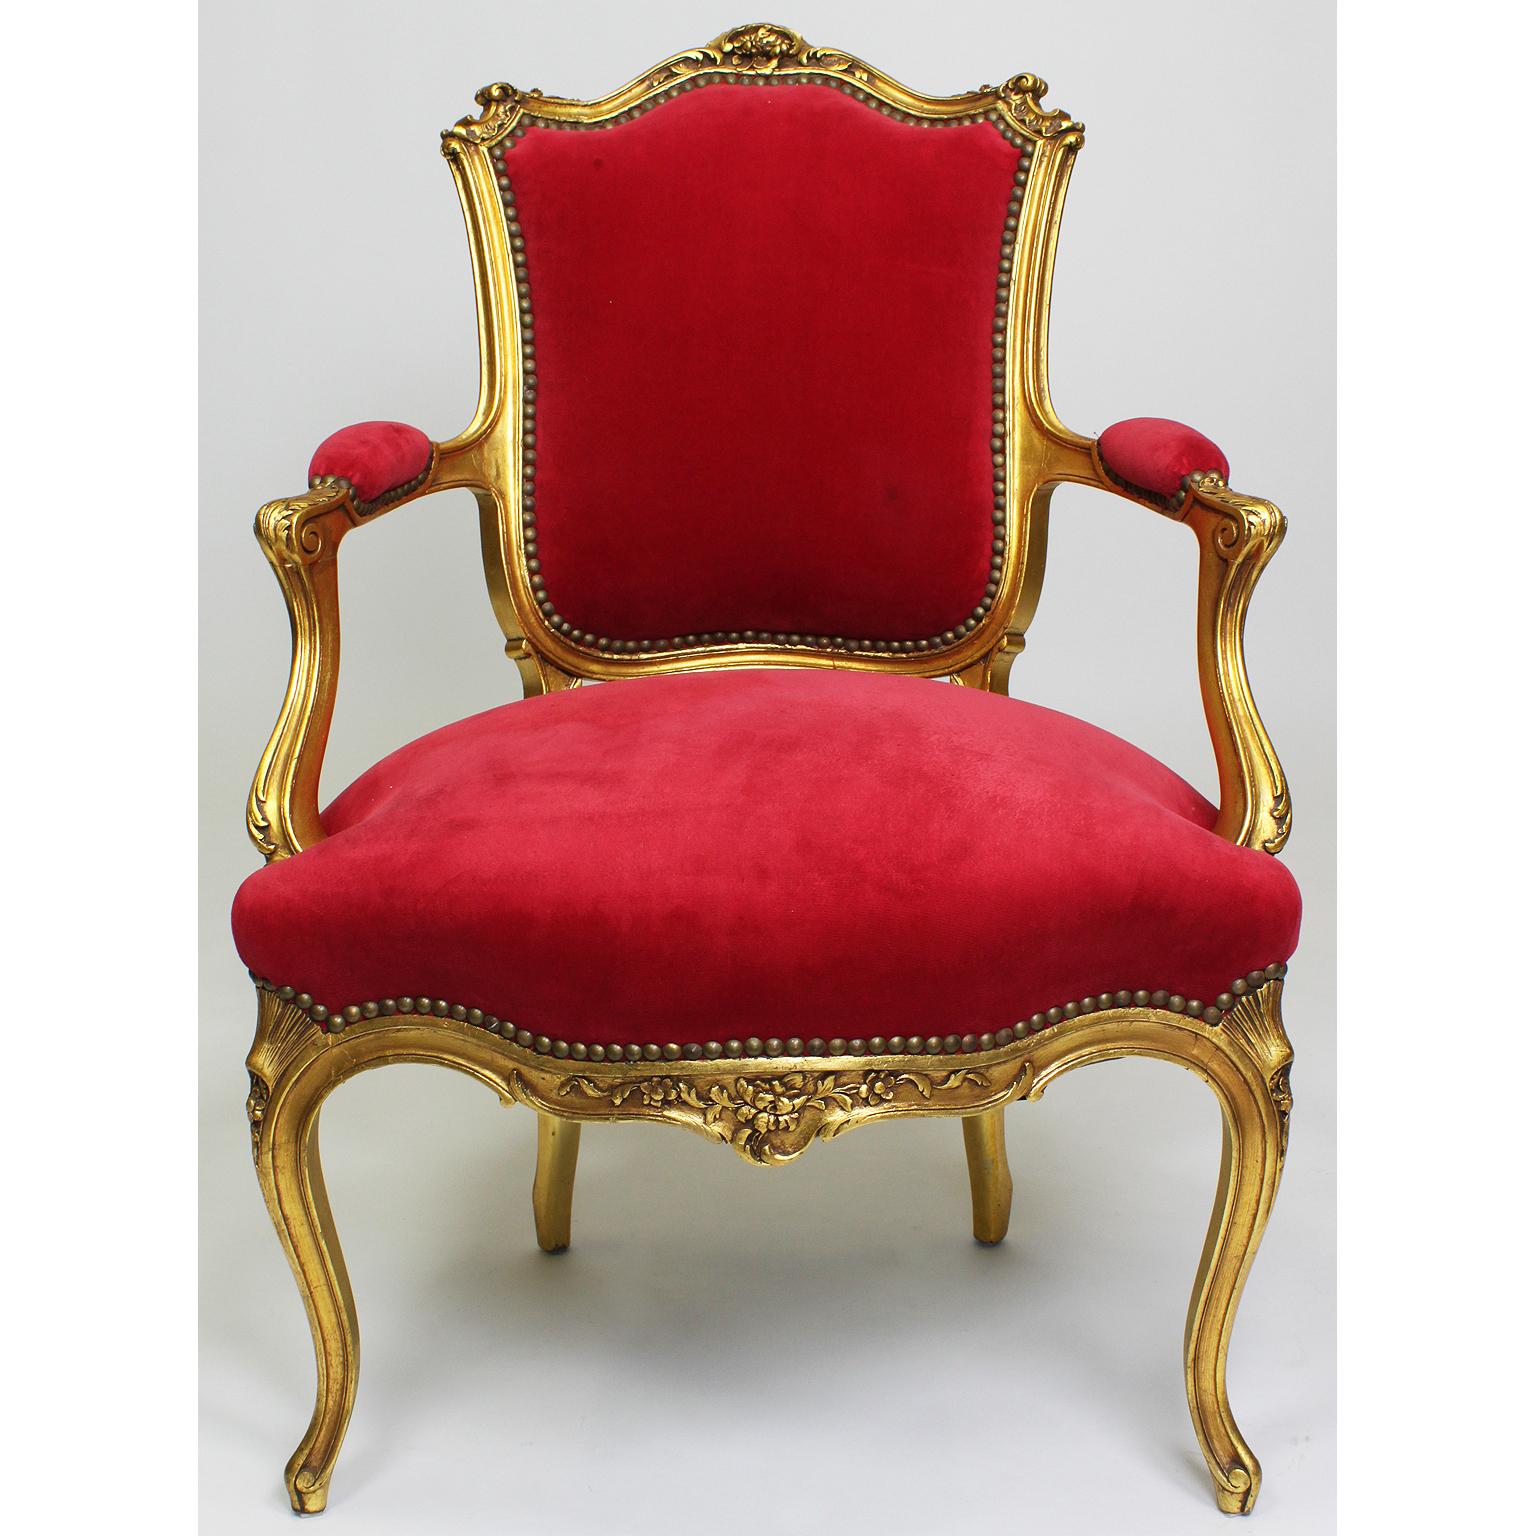 A pair of French Louis XV style giltwood carved Rococo fauteuils (armchairs). The intricately carved wood frames with open scrolled and padded armrests and cabriolet legs. Upholstered in a red velvet, Paris, circa 1900s.

Measures: Height 36 1/2